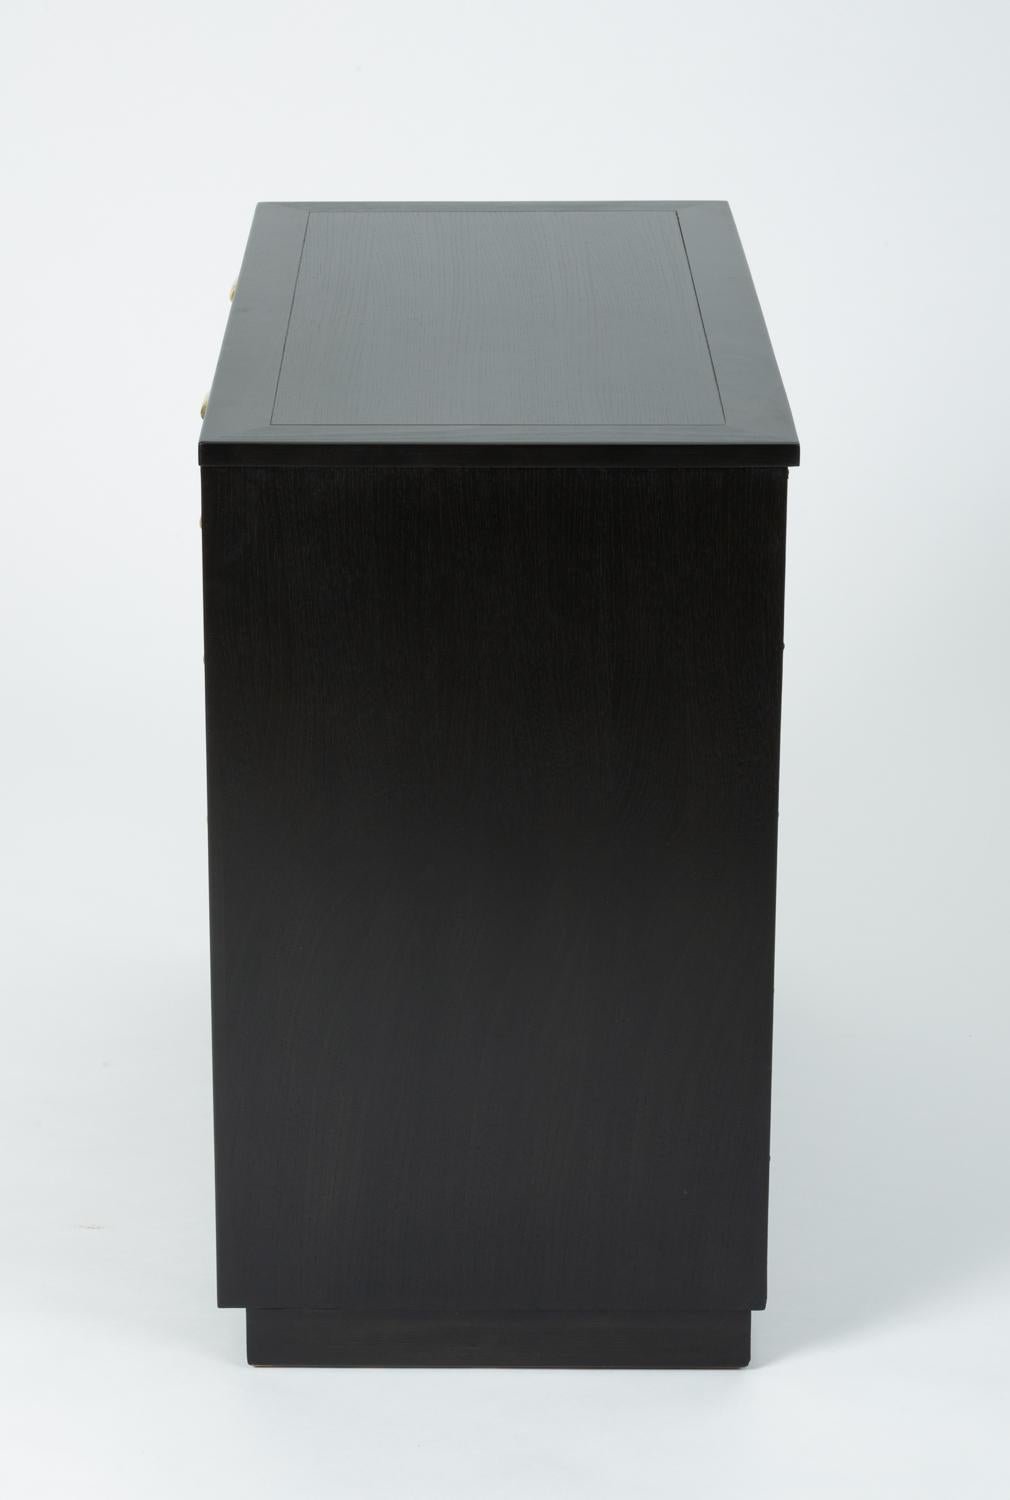 American Ebonized Chest of Drawers from Edward Wormley’s Precedent Collection for Drexel